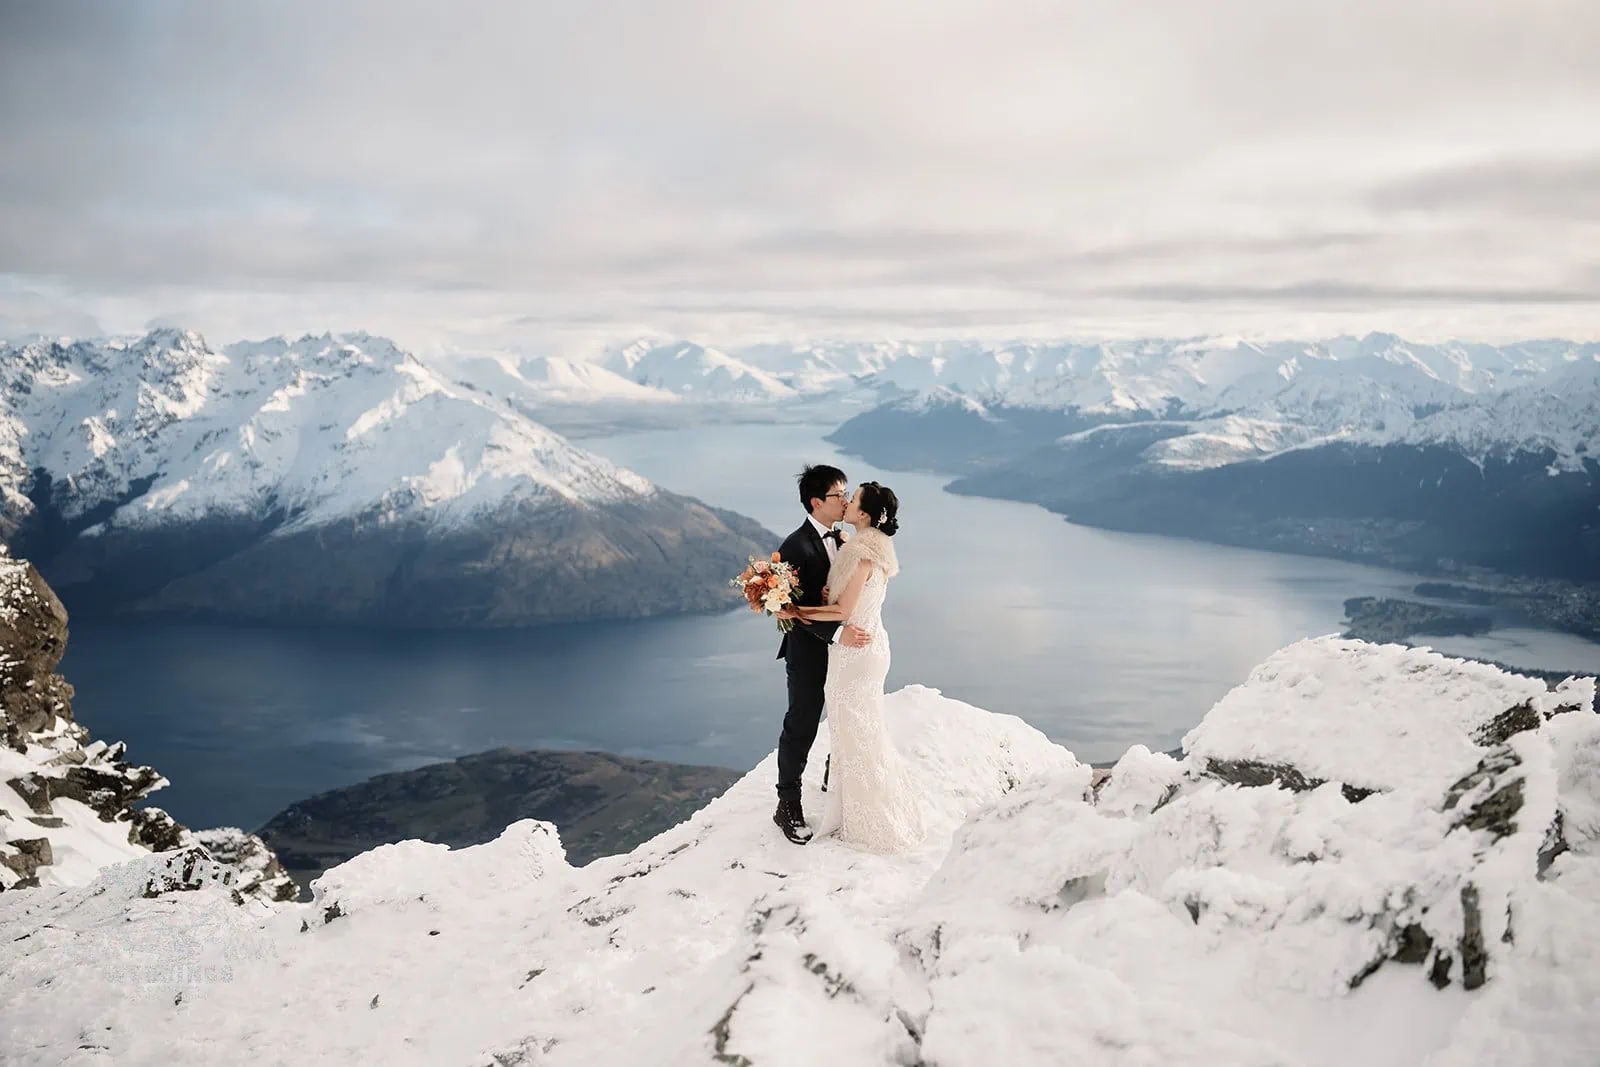 A bride and groom, Joanna and Tony, posing on a mountain in Queenstown overlooking Lake Wanaka during their pre-wedding shoot in New Zealand.